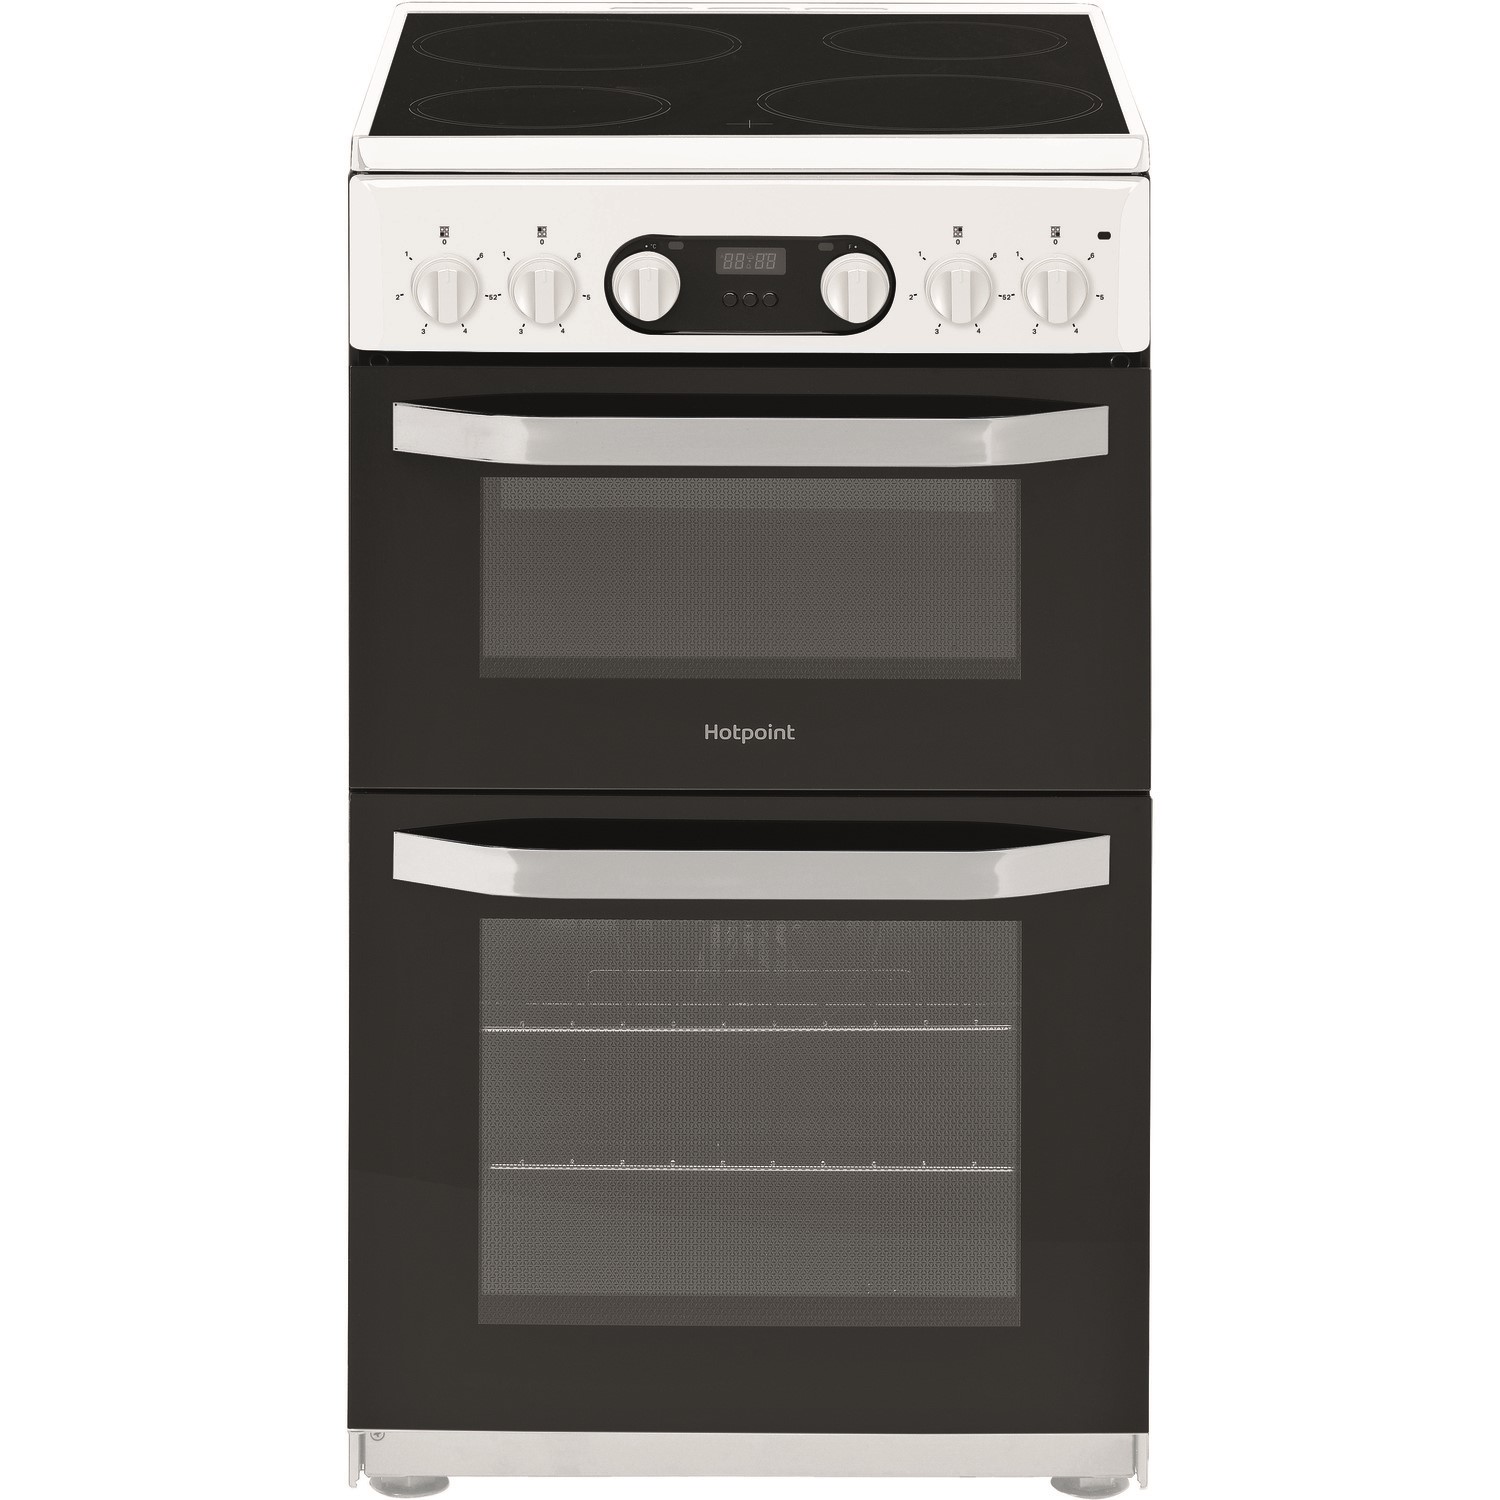 Hotpoint 50cm Double Oven Electric Cooker with Ceramic Hob - White